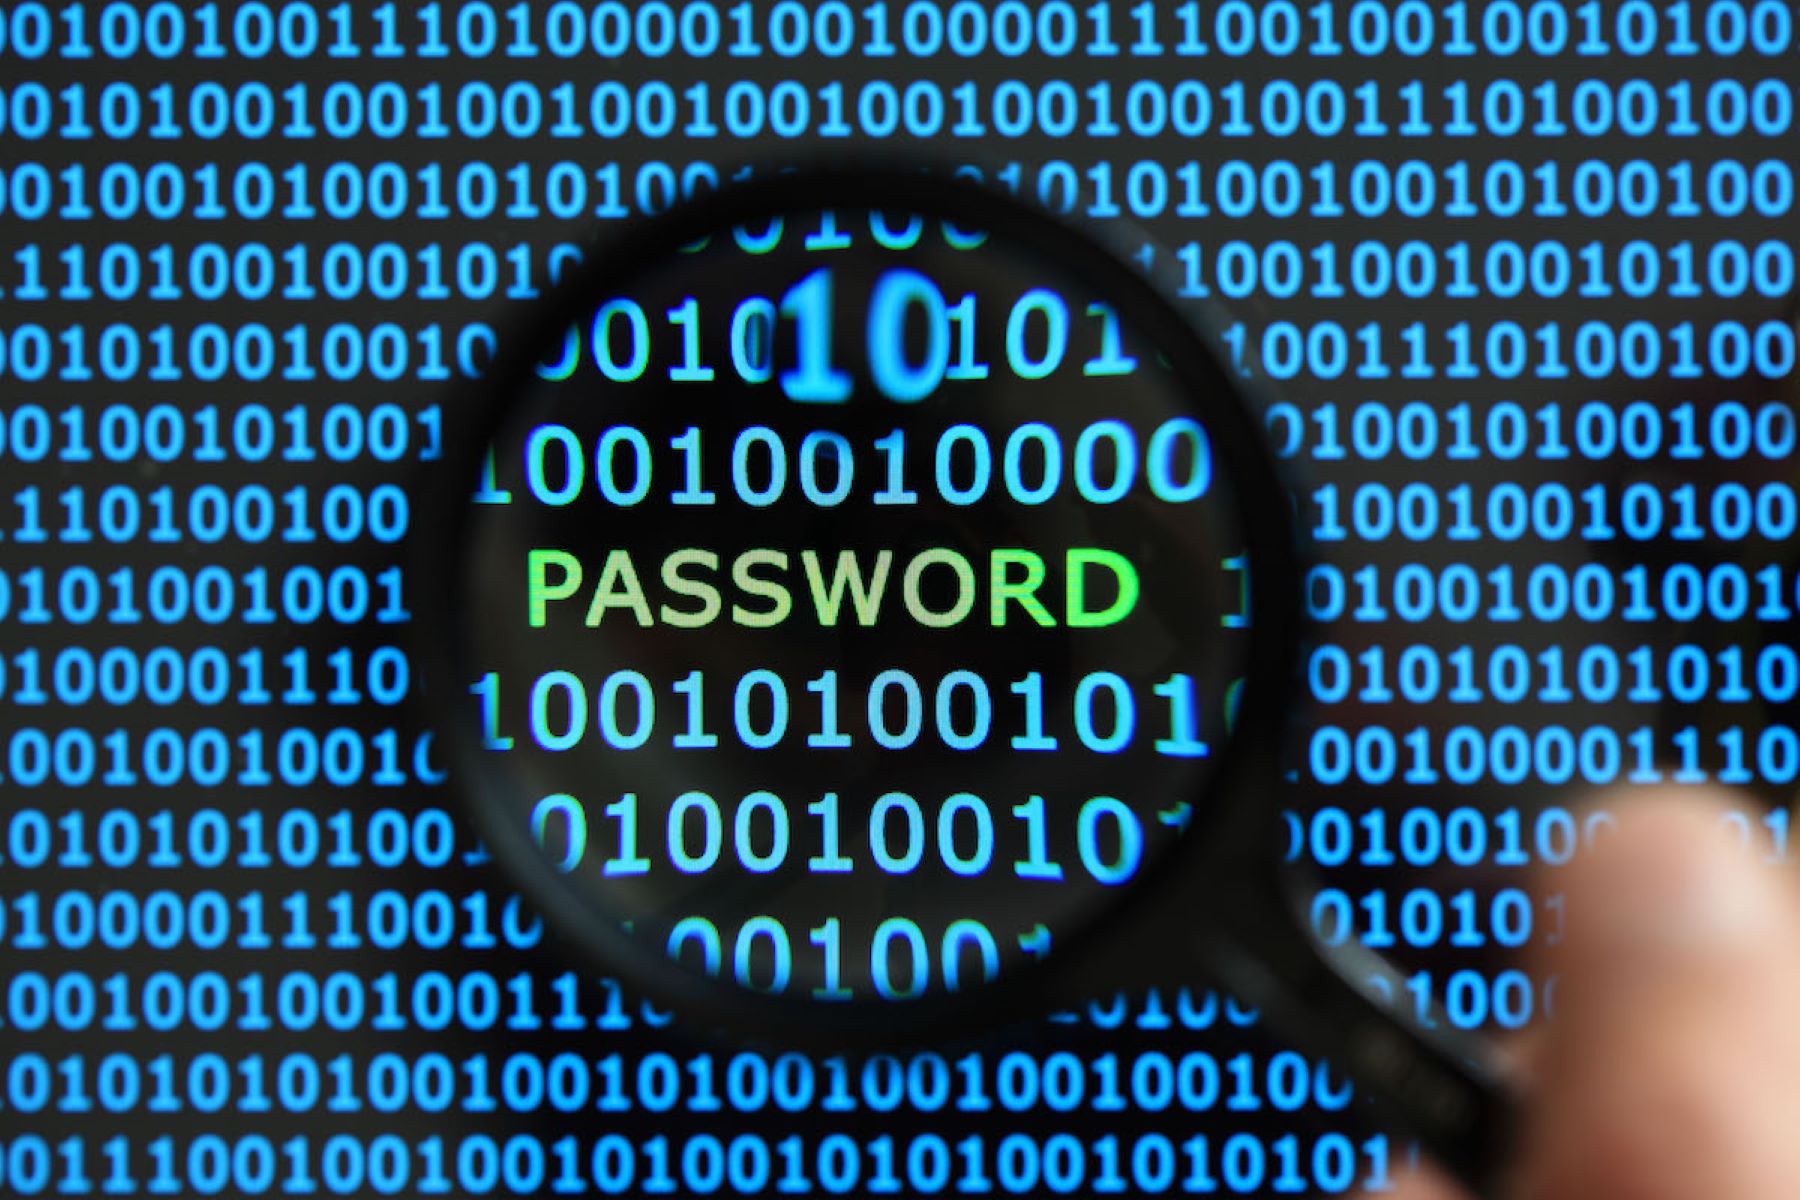 logicmonitor-customers-at-risk-of-hacking-due-to-default-passwords